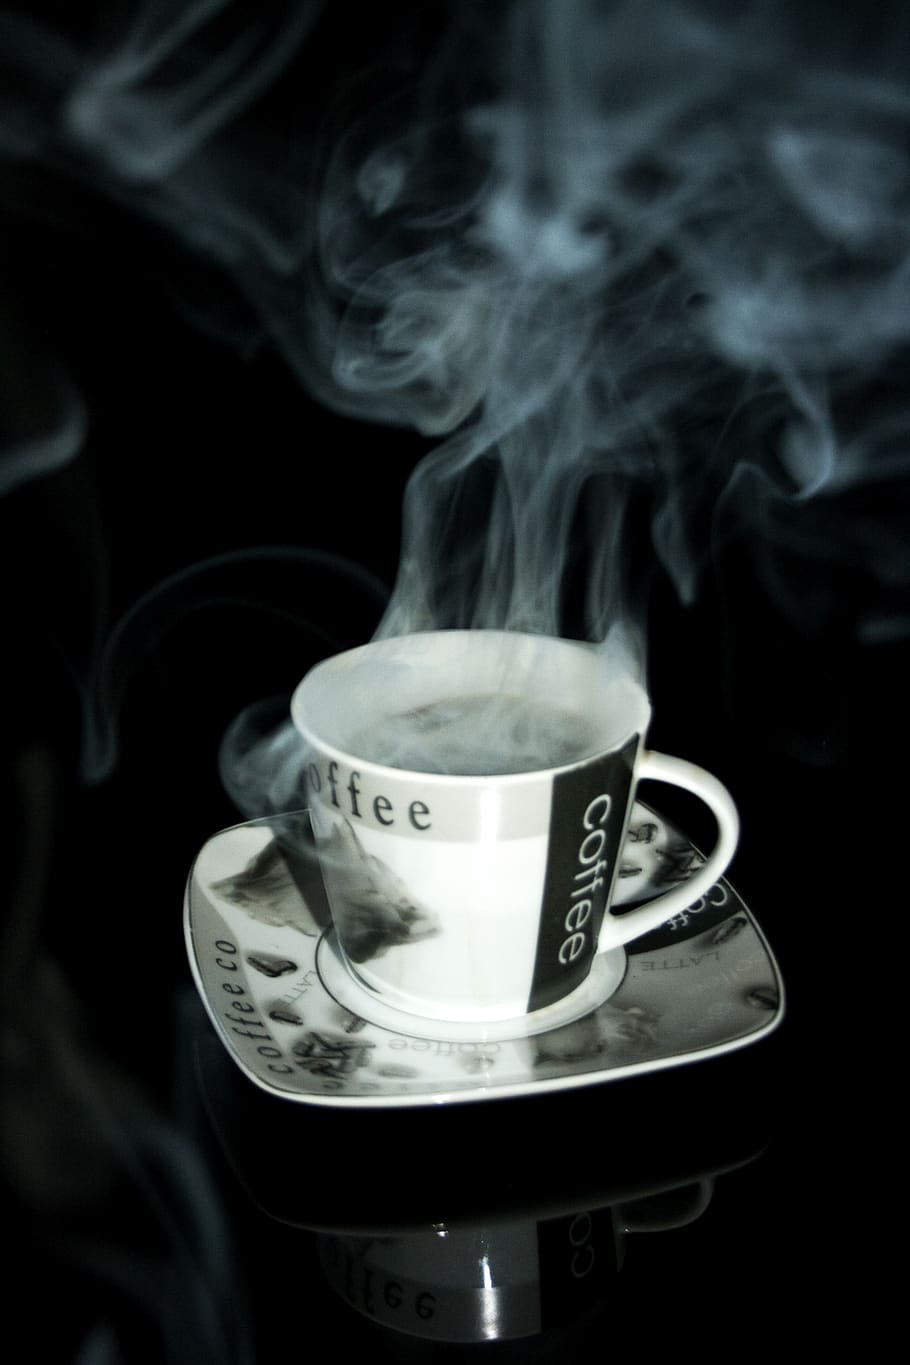 coffee, teacup, the dish, cafe, coffee maker, a cup of coffee, porcelain, caffeine, smoke - physical structure, cup